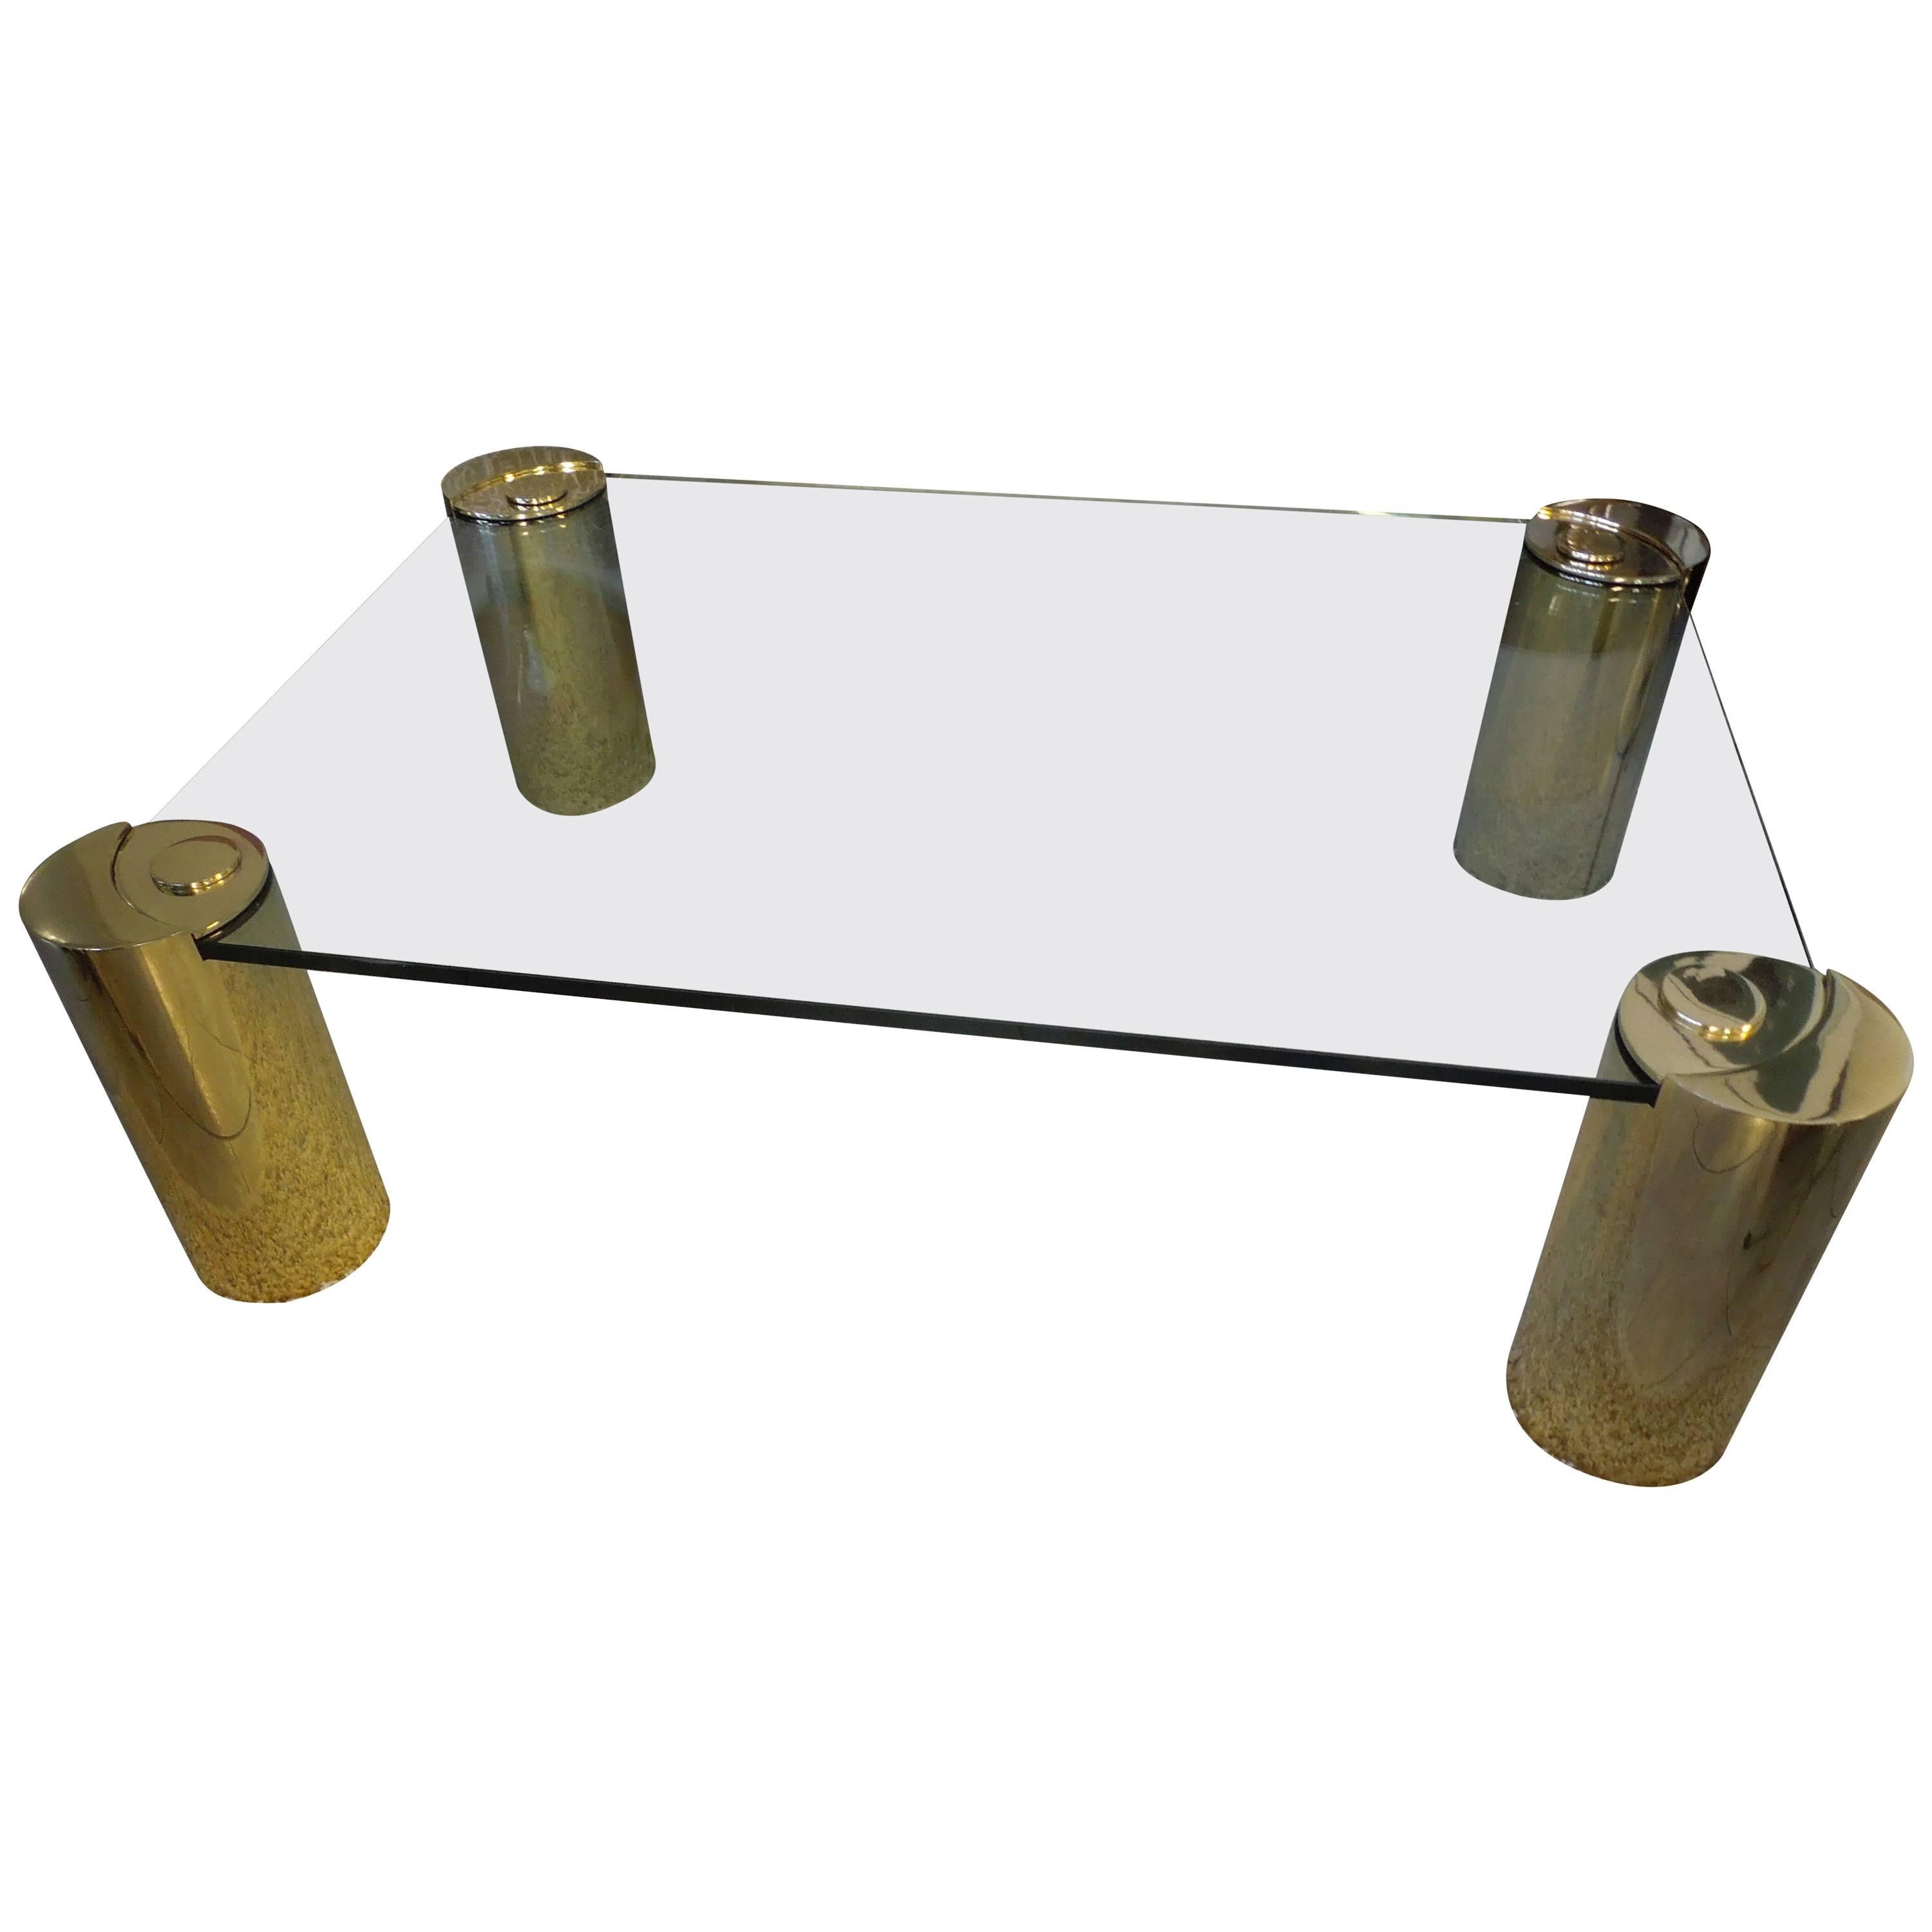 Exceptional 80s Brass and Glass Coffee Table Attributed to Karl Springer